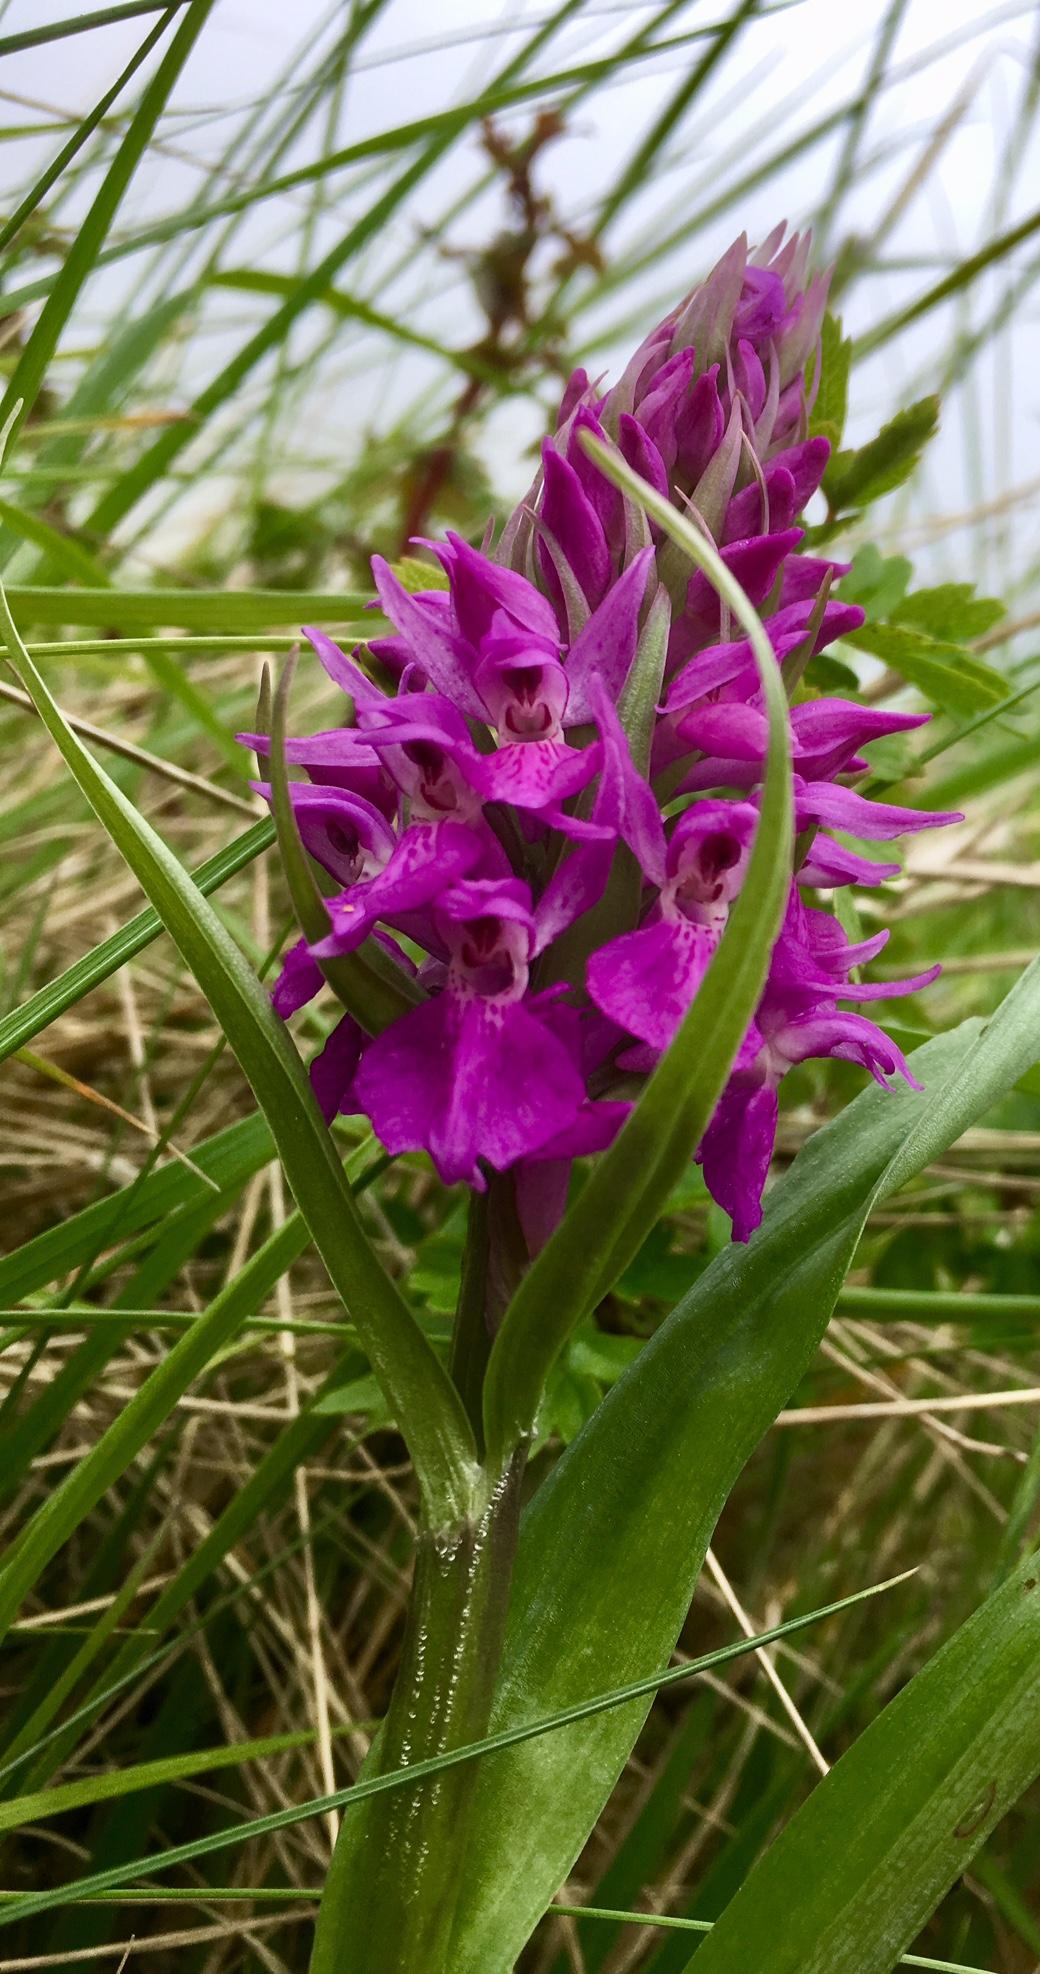 Marsh and Pyramid Orchids are a lovely site in summer at Donna Nook